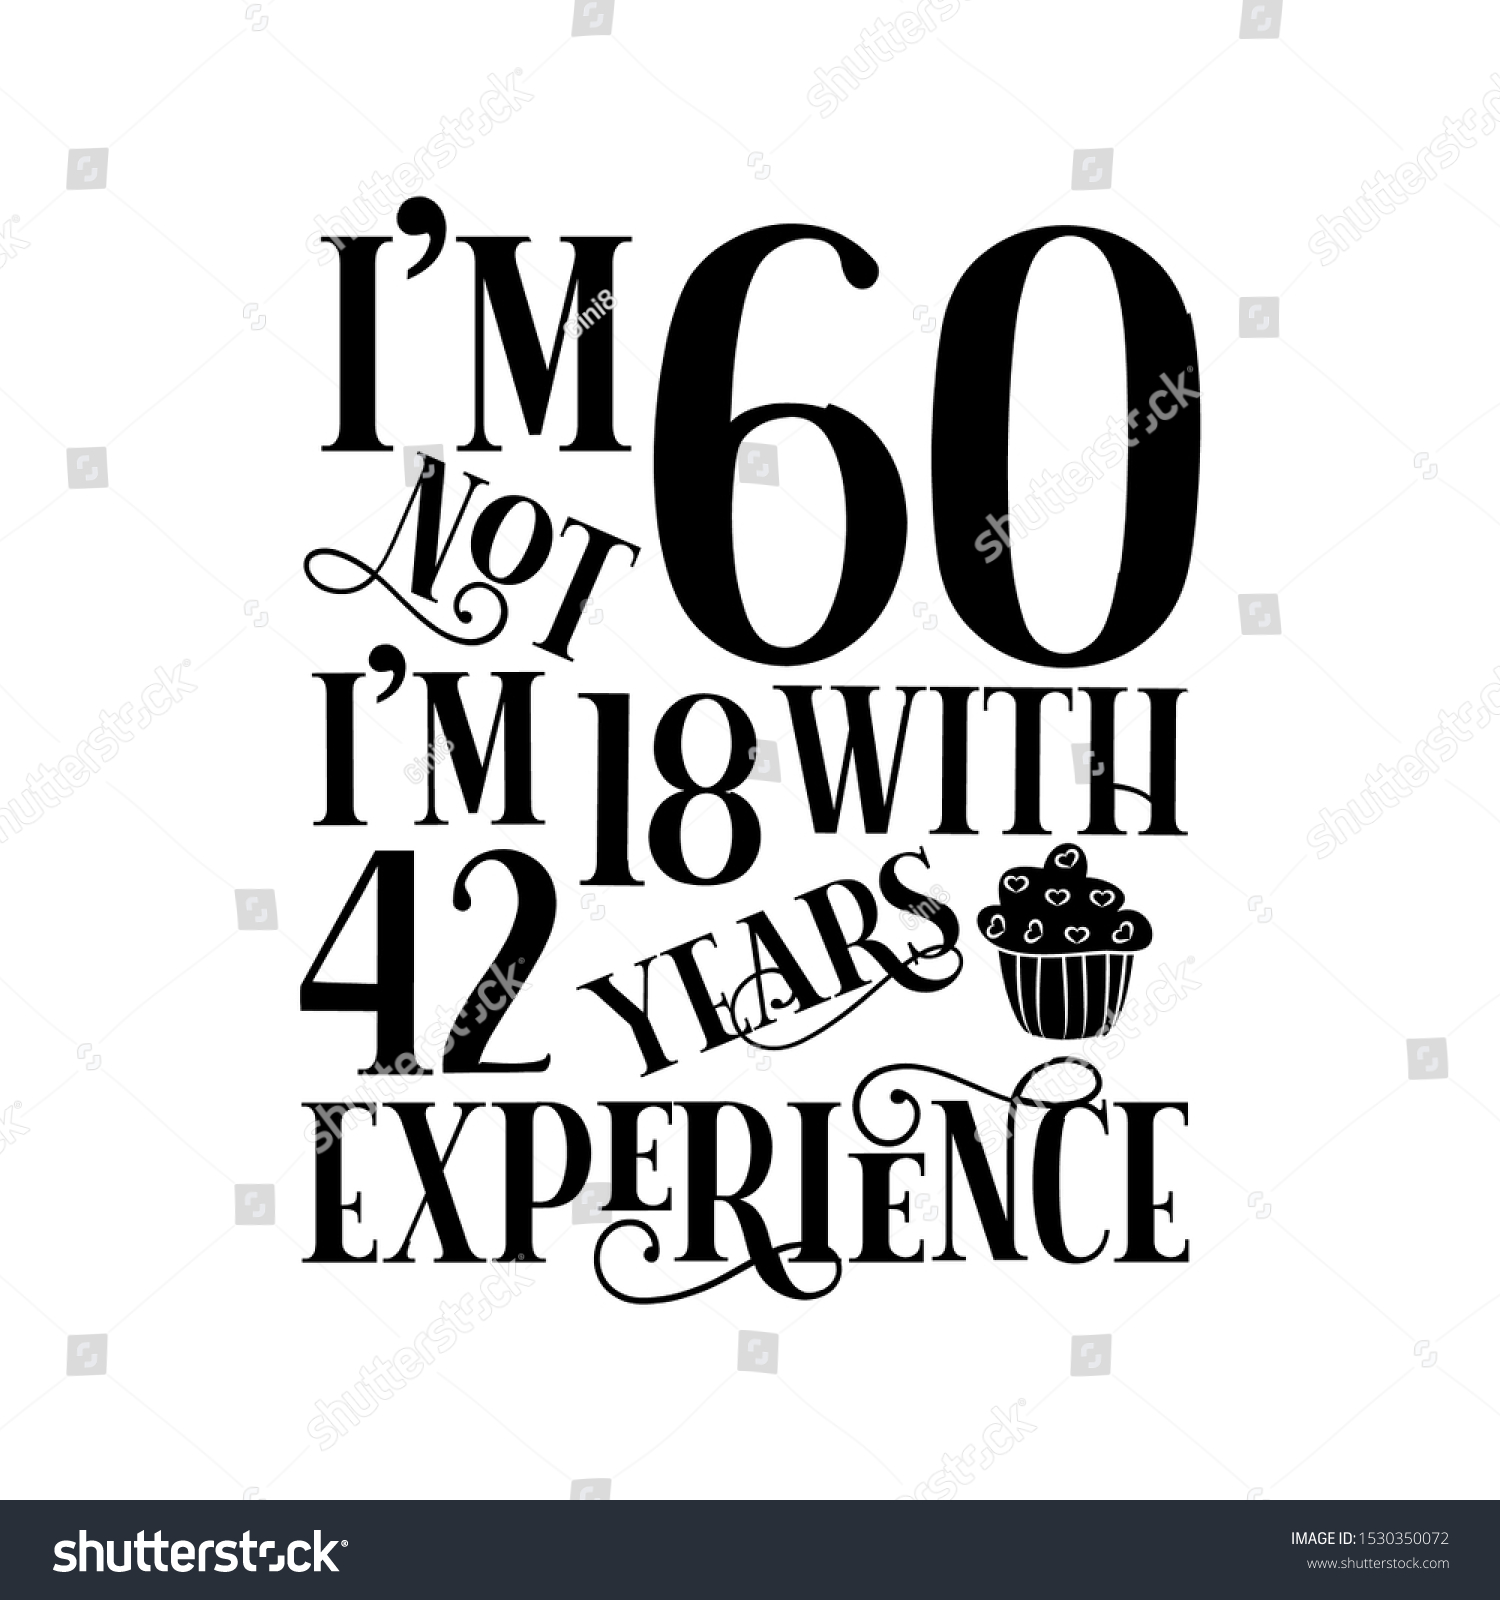 SVG of I'm not 60 i'm 18 with 42 years experience- funny birthday text, with cupcake. Good for greeting card and  t-shirt print, flyer, poster design, mug. svg